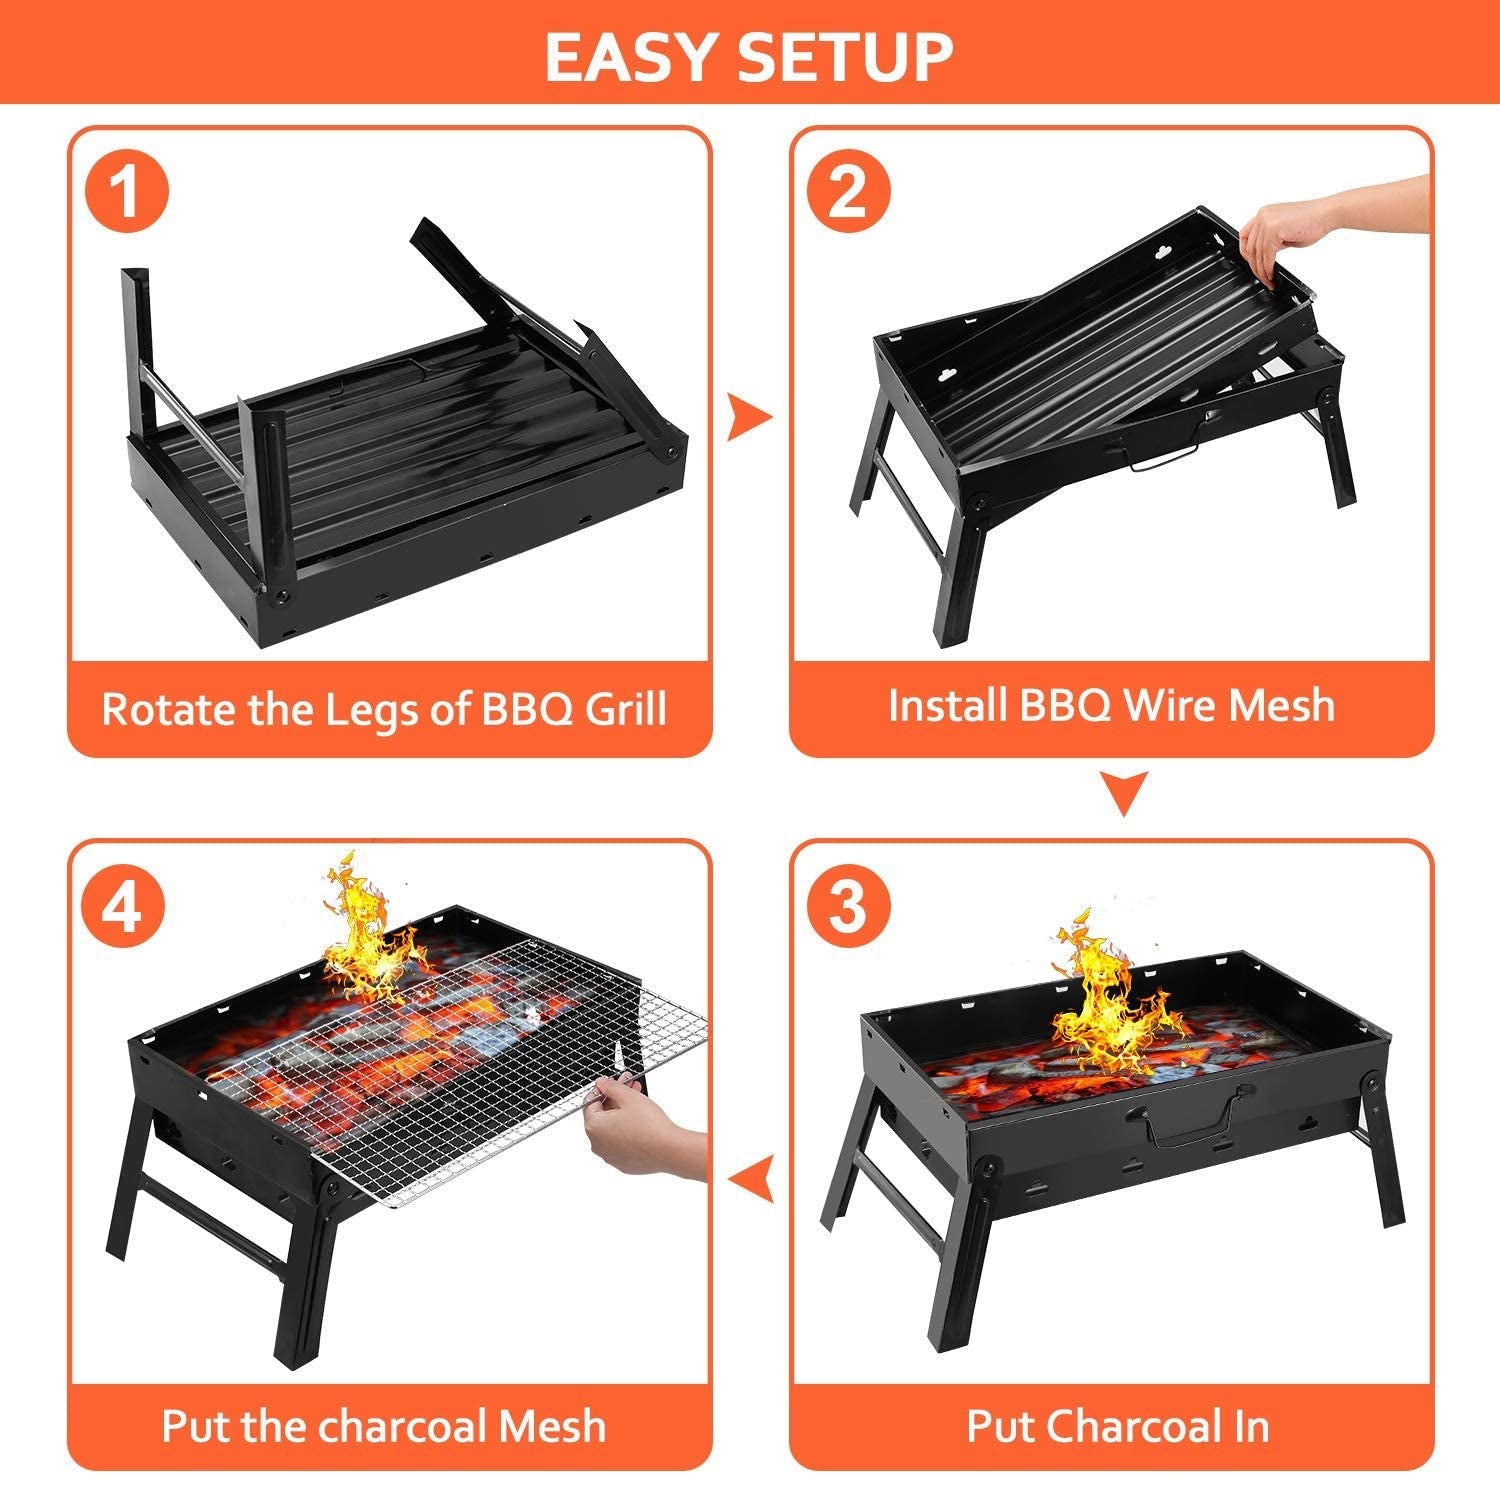 0126 A Barbecue Grill used for making barbecue of types of food stuffs like vegetables, chicken meat etc.